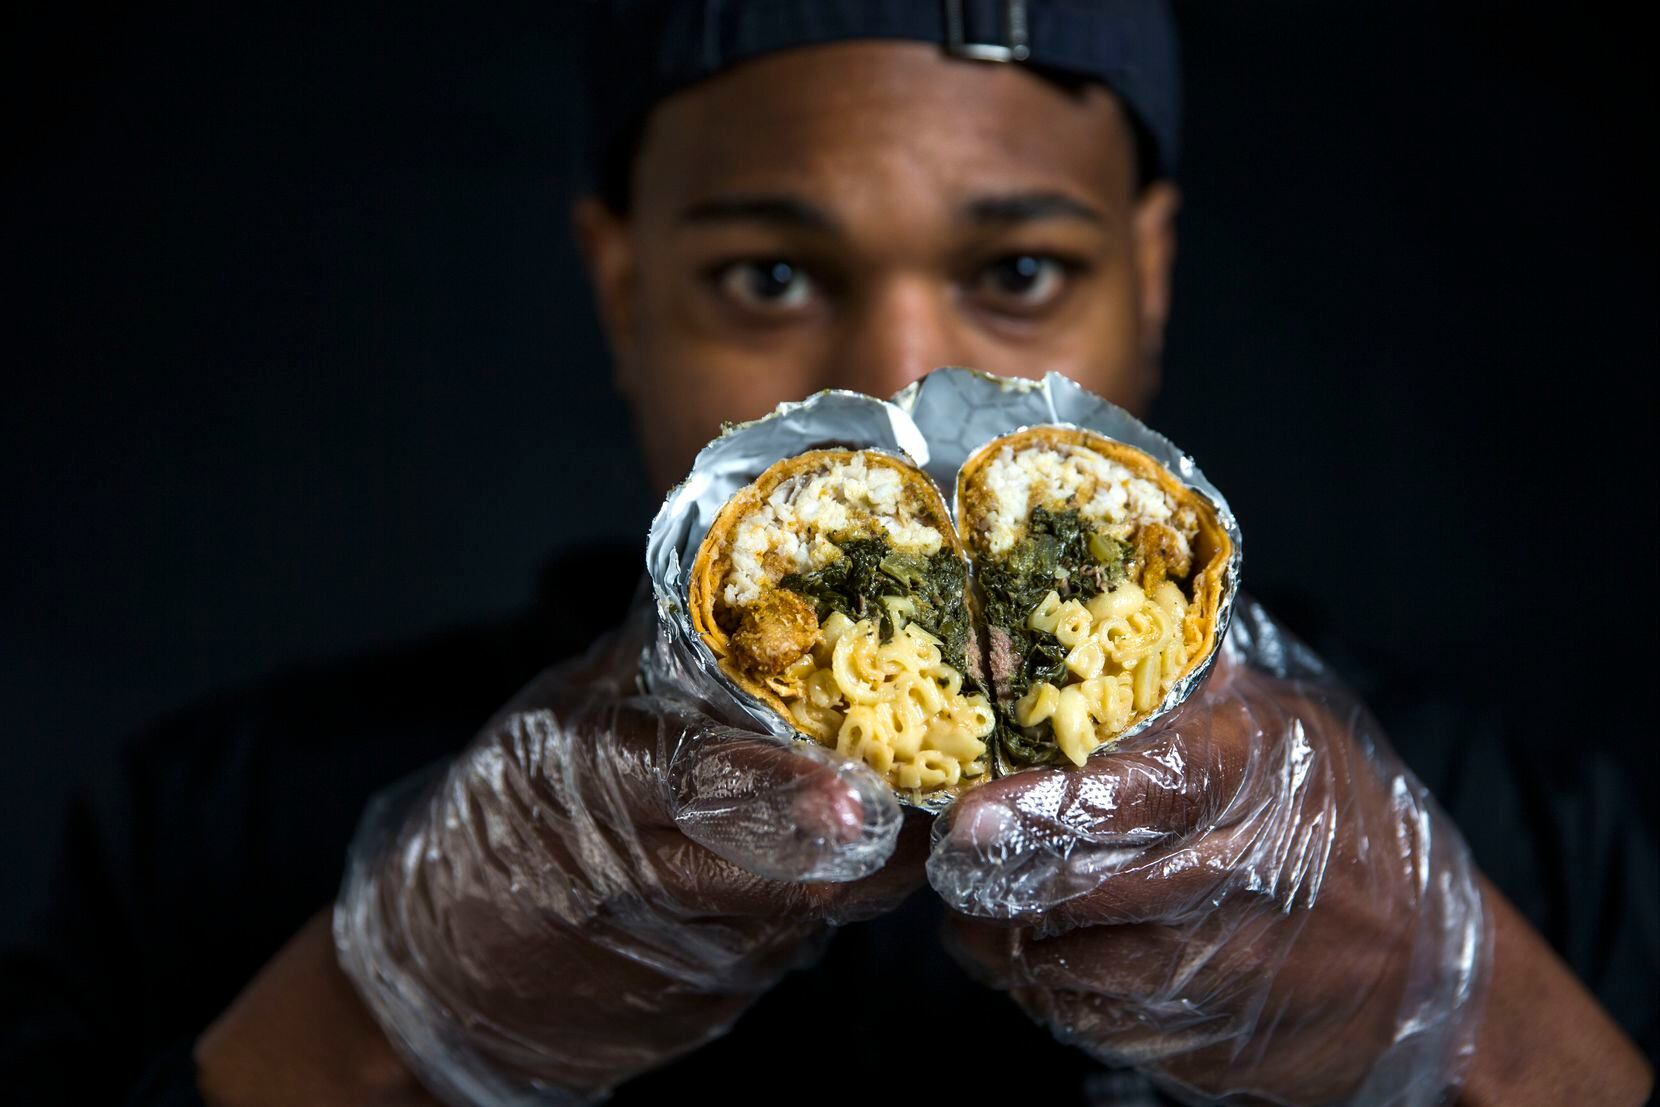 Jessie Washington, Brunchaholics owner and chef, is the creator of a truly monstrous soul...